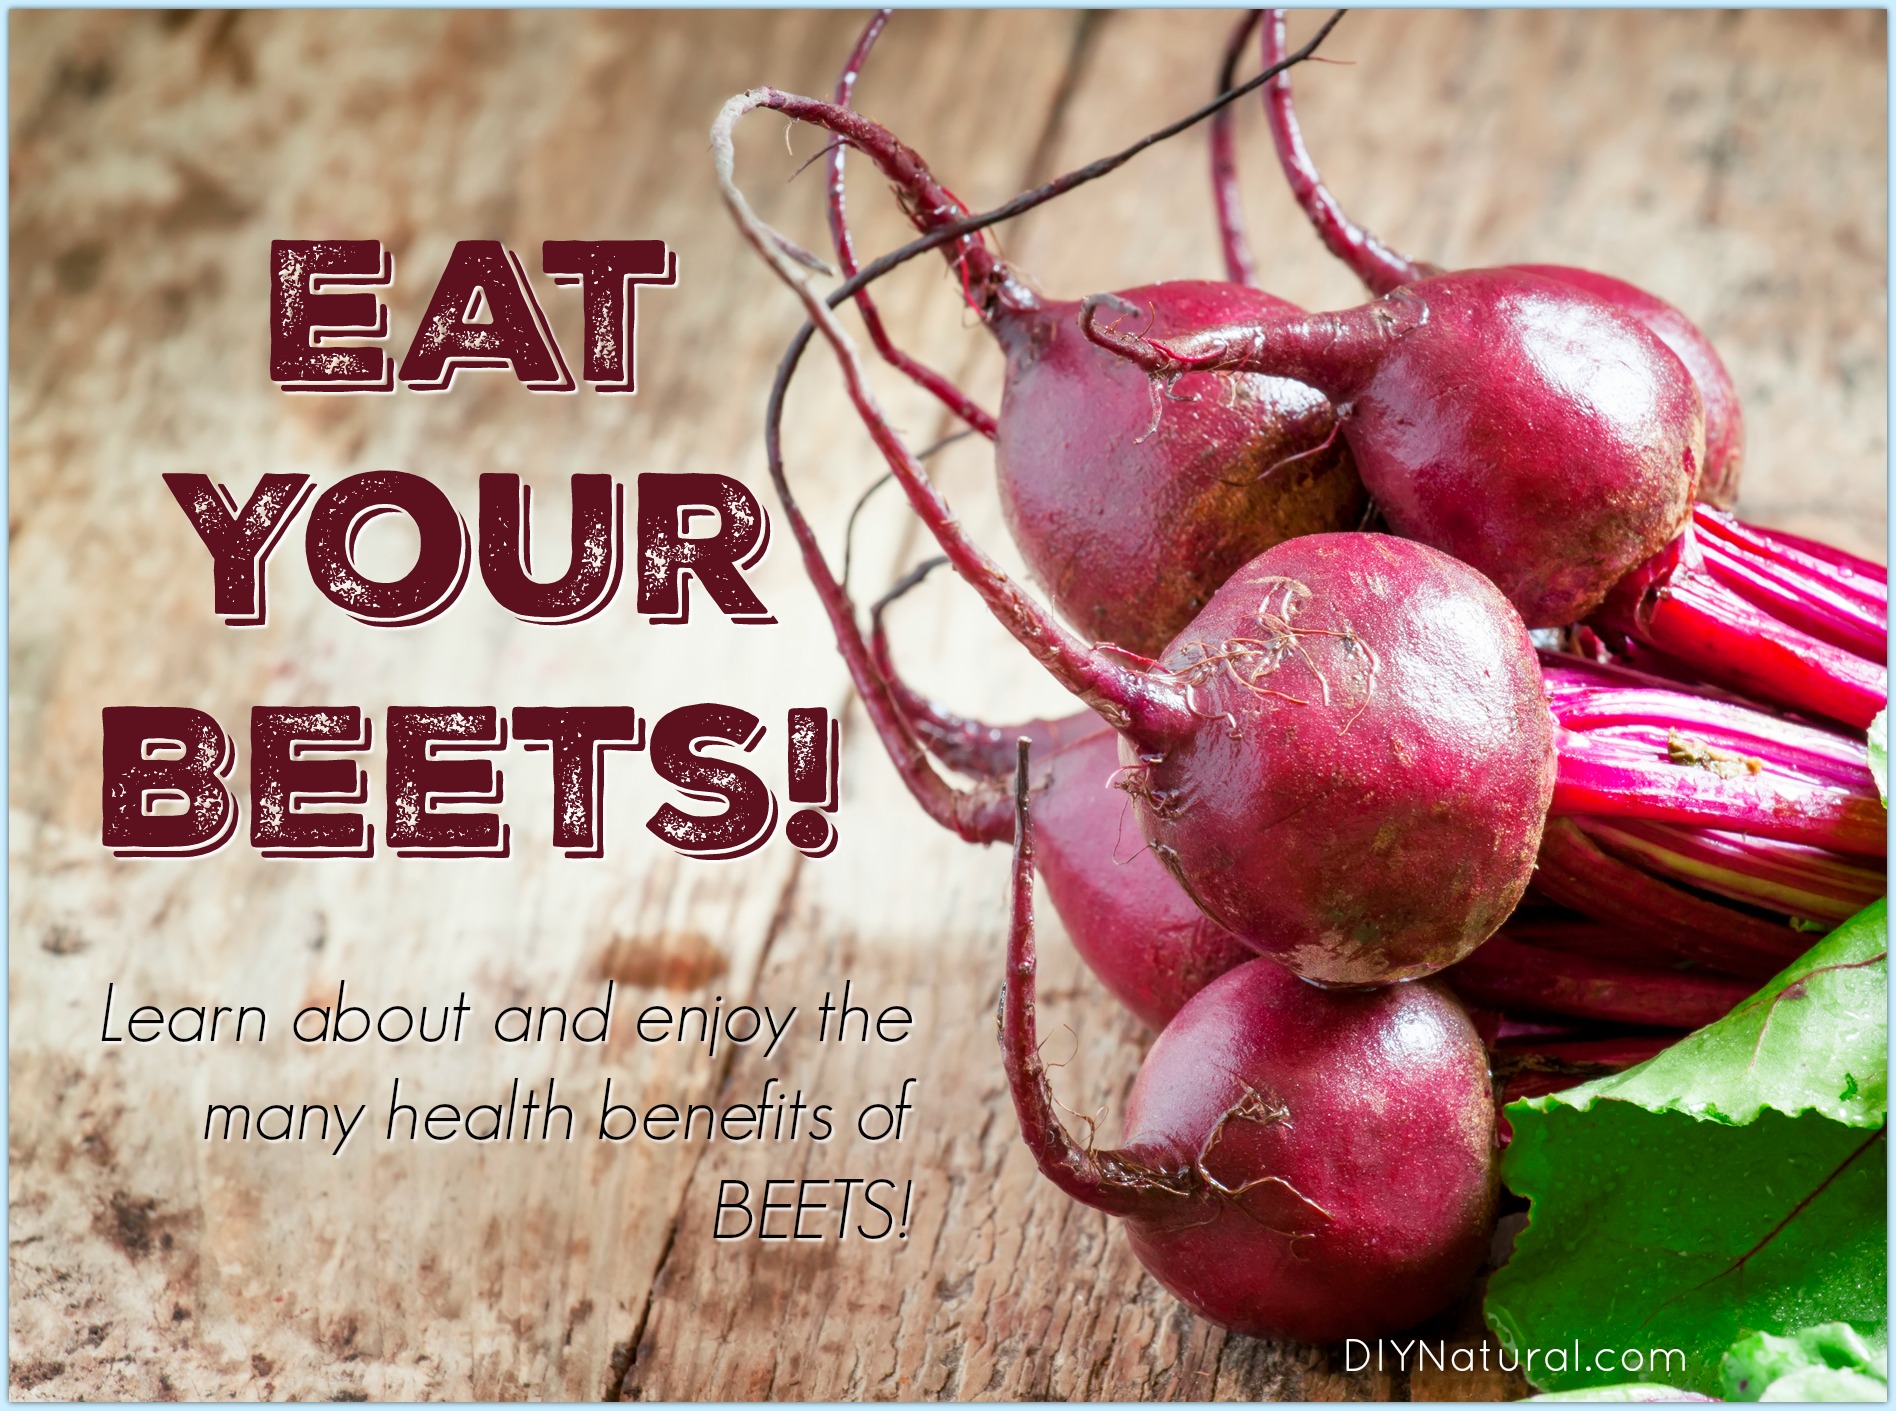 Beets Benefits: Are Beets Good for You? Yes, and You Should Eat Them!